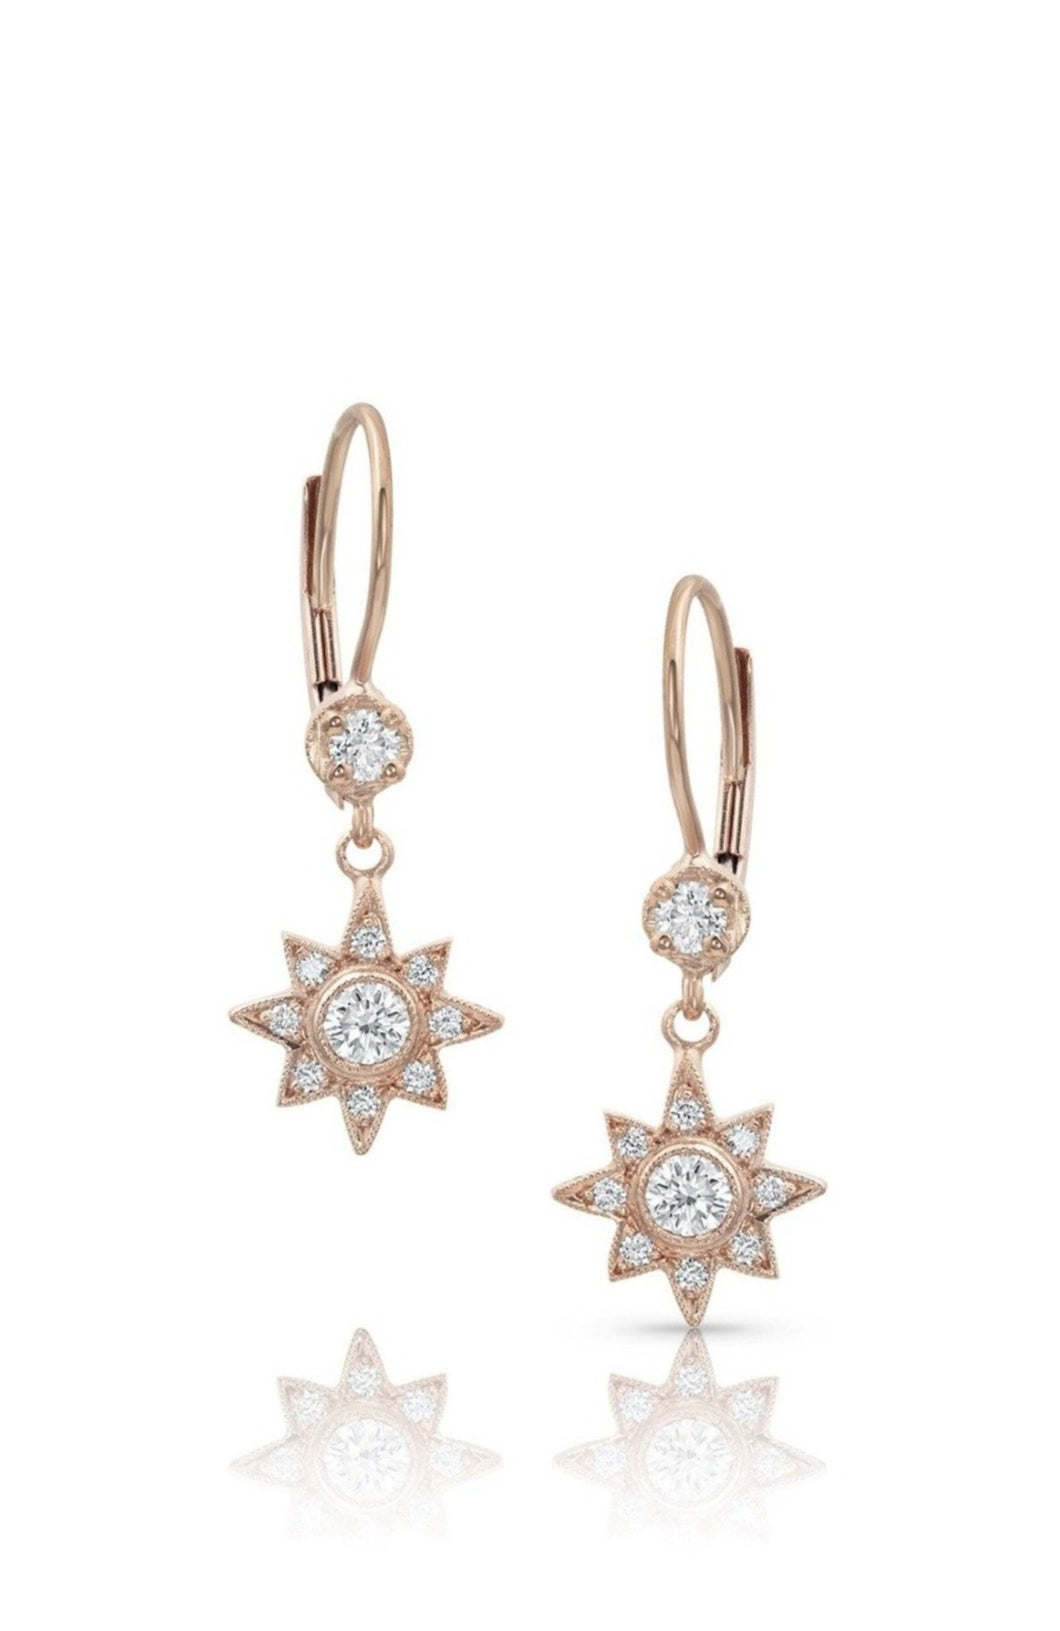 Diamond and Rose Gold Earrings - Heavenly - Goldhaus & Alexander Jewelry Design